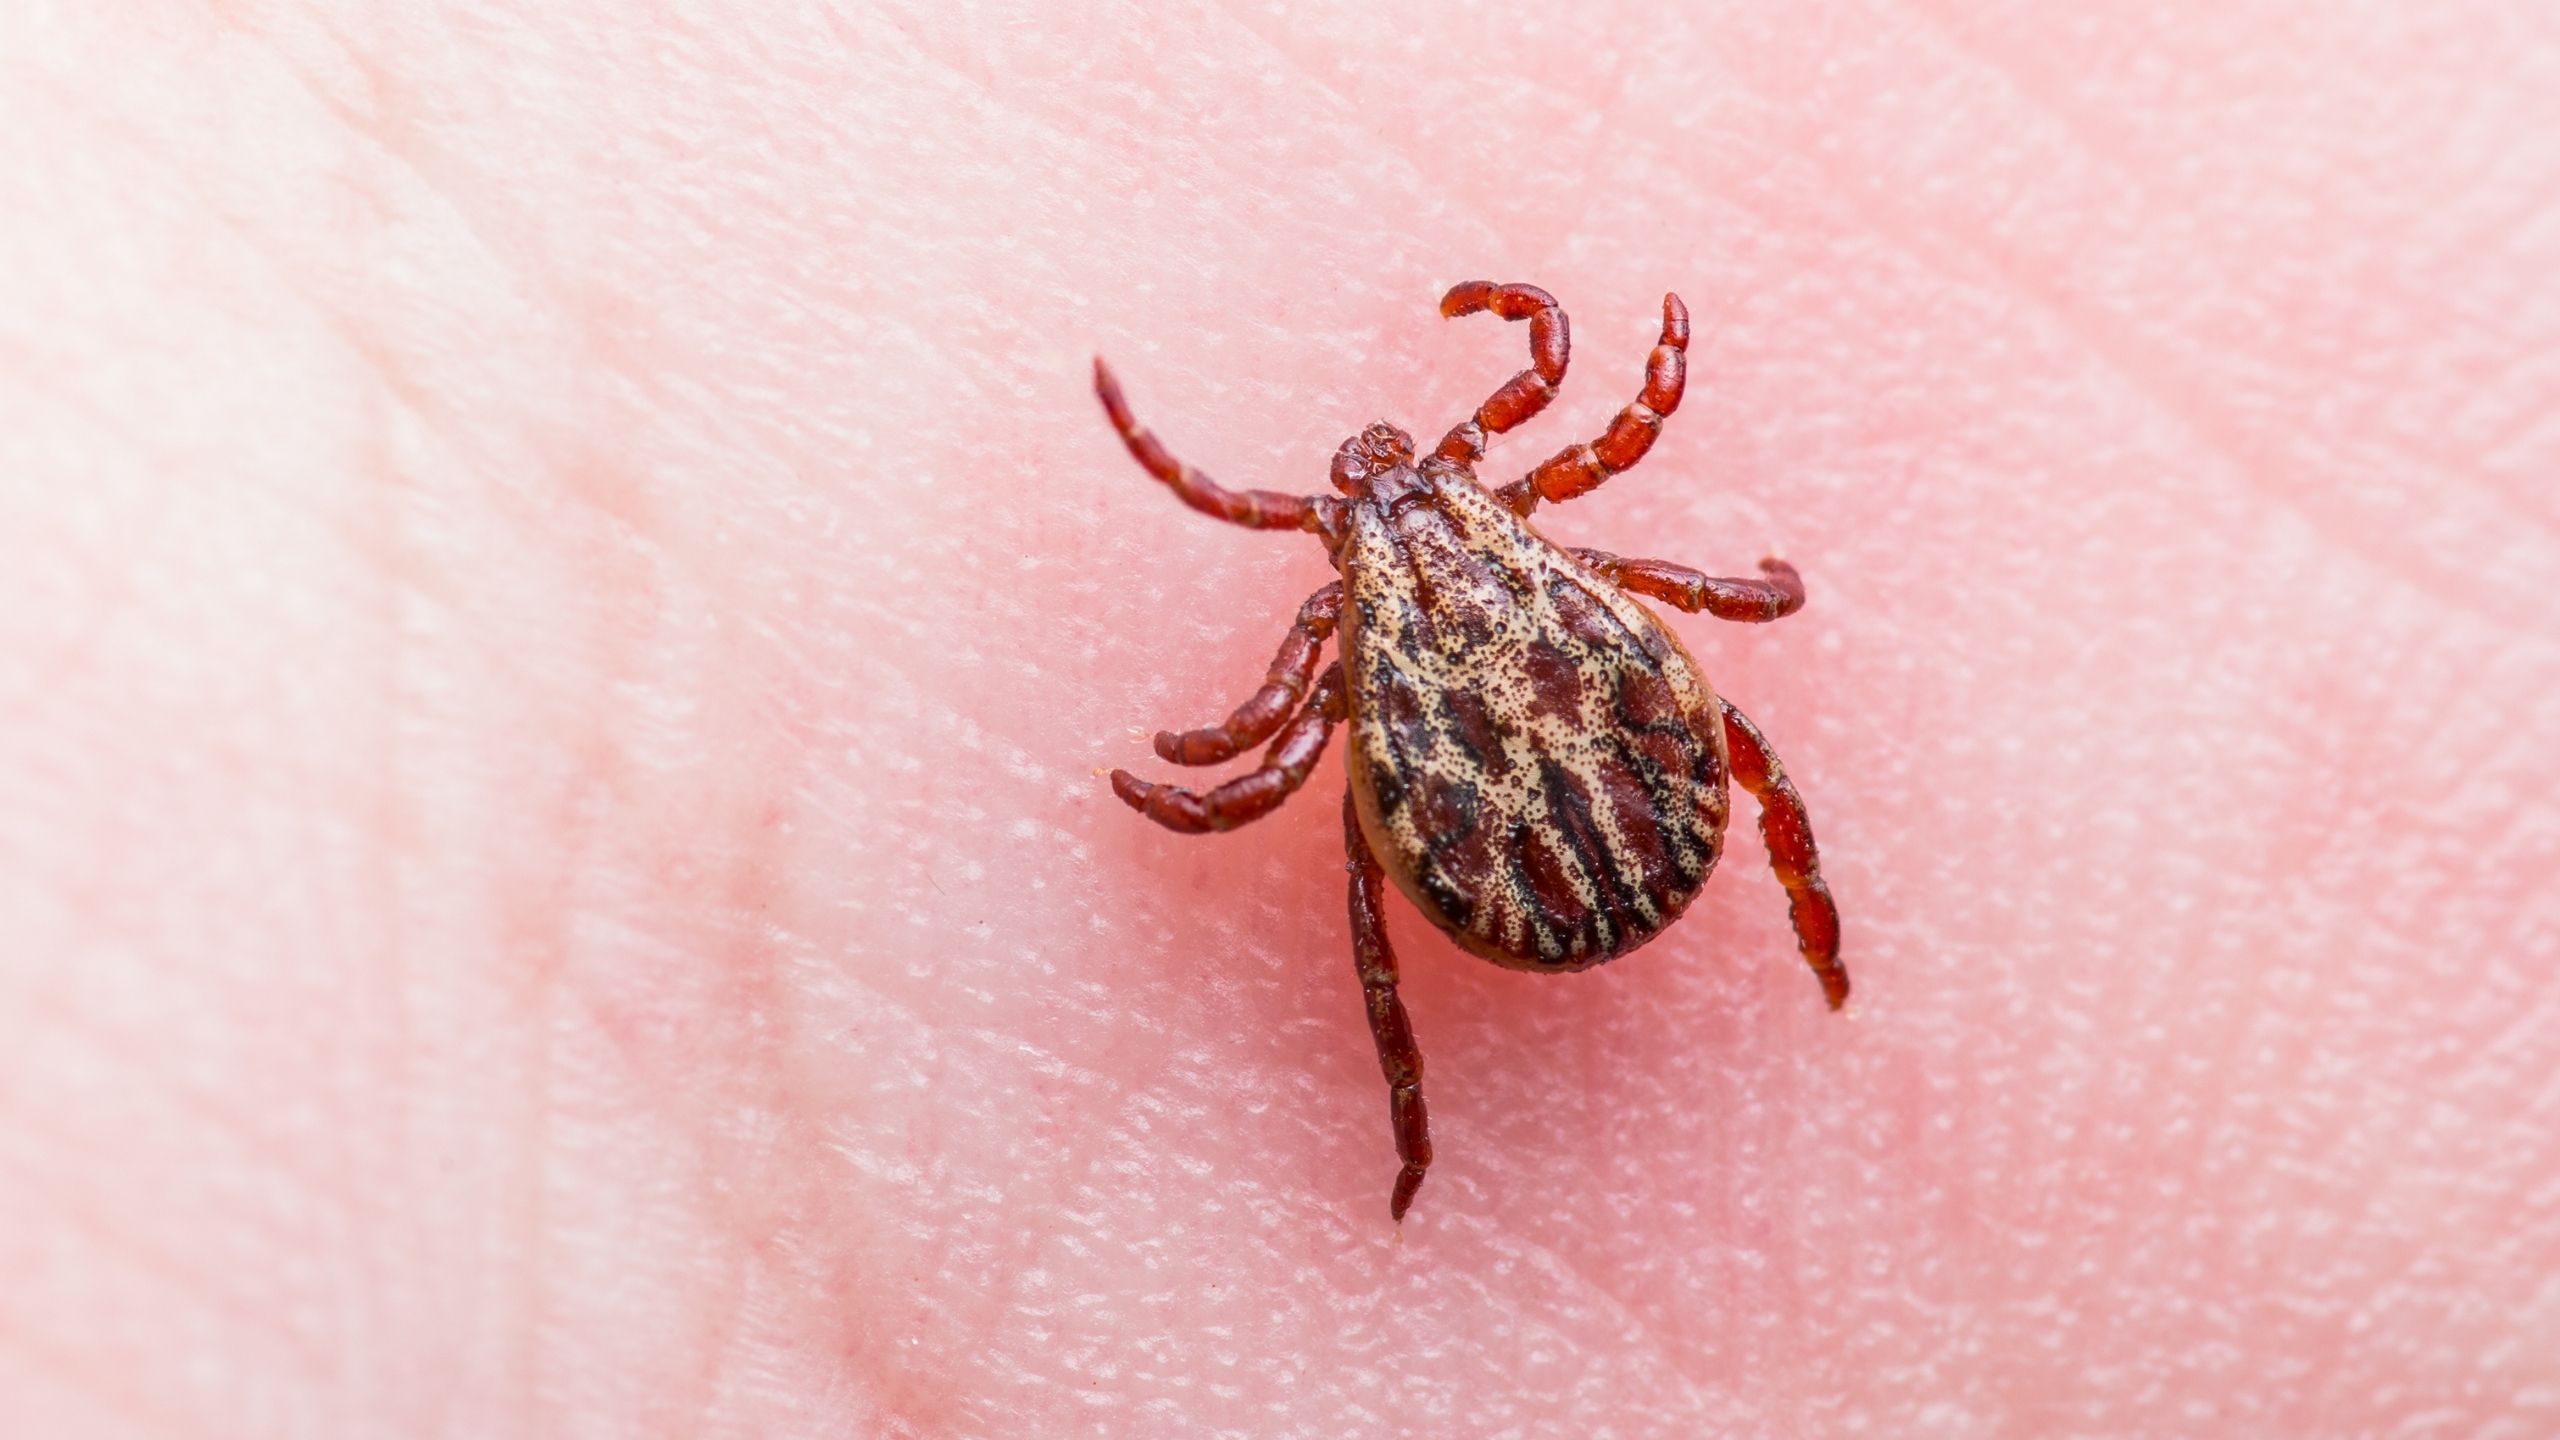 Fig. 1. Rocky Mountain wood tick female adult